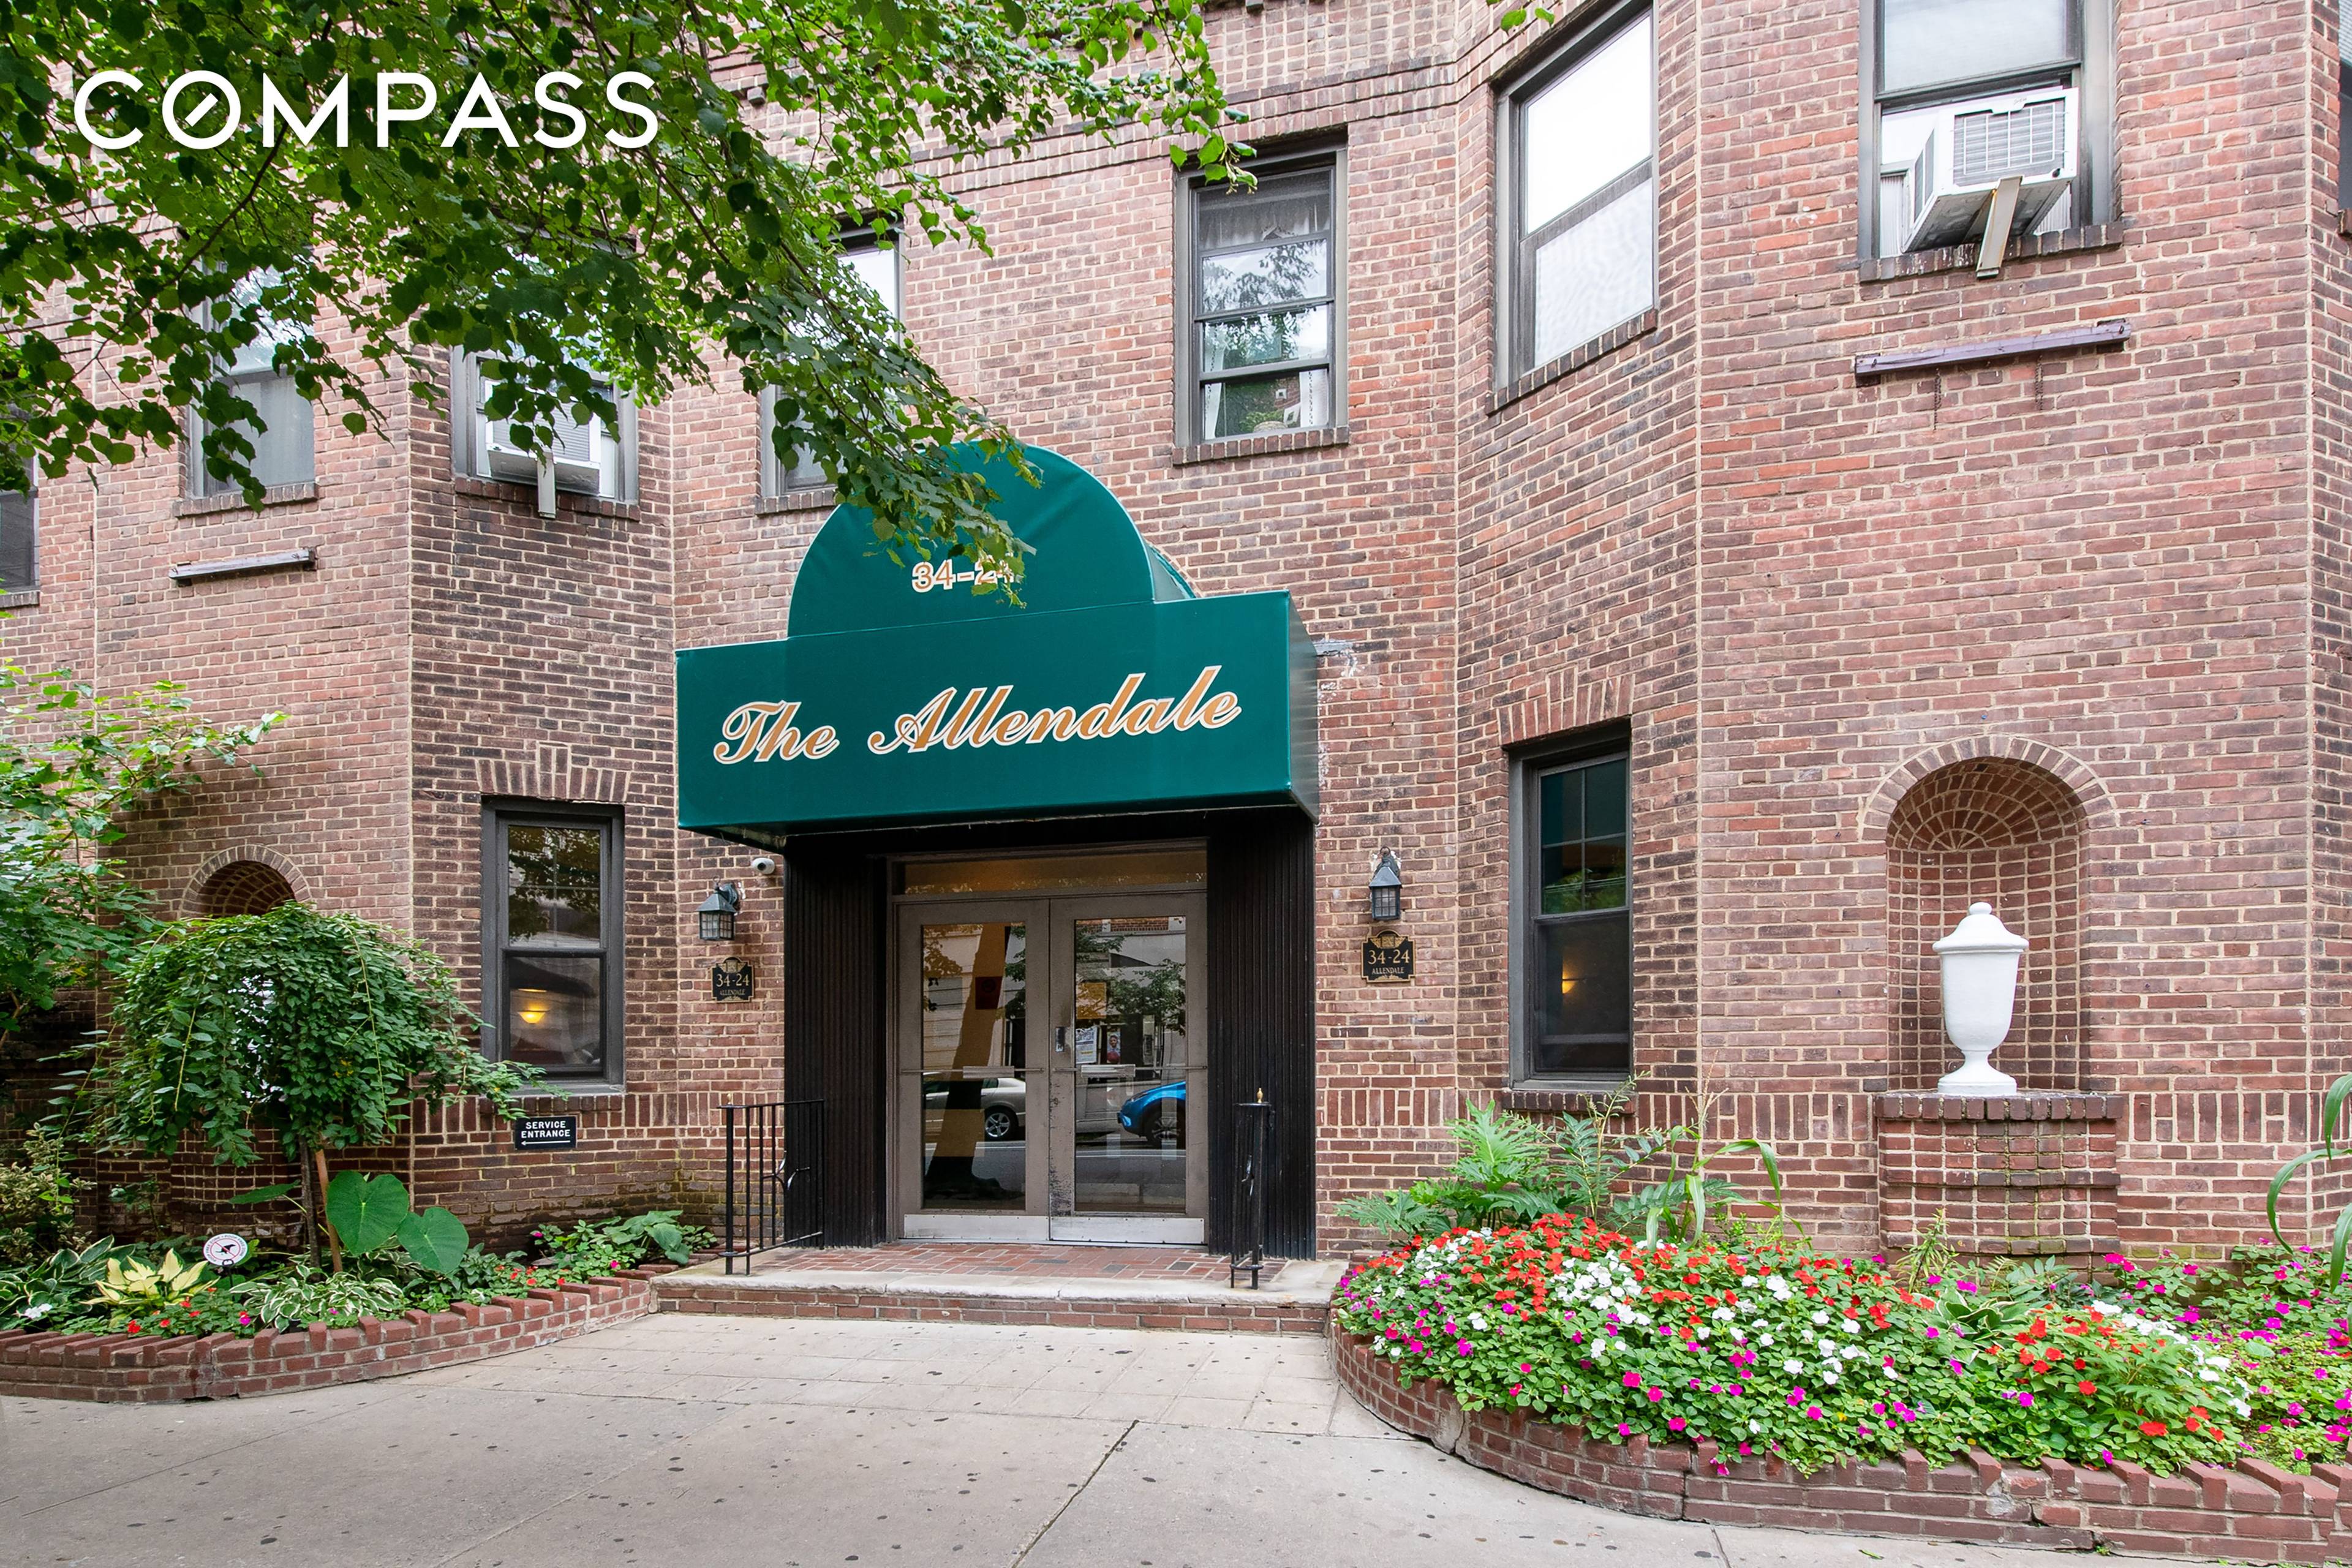 Completed in 1937, the Allendale is a premier Coop located in the Heart of the Landmark District of Jackson Heights.